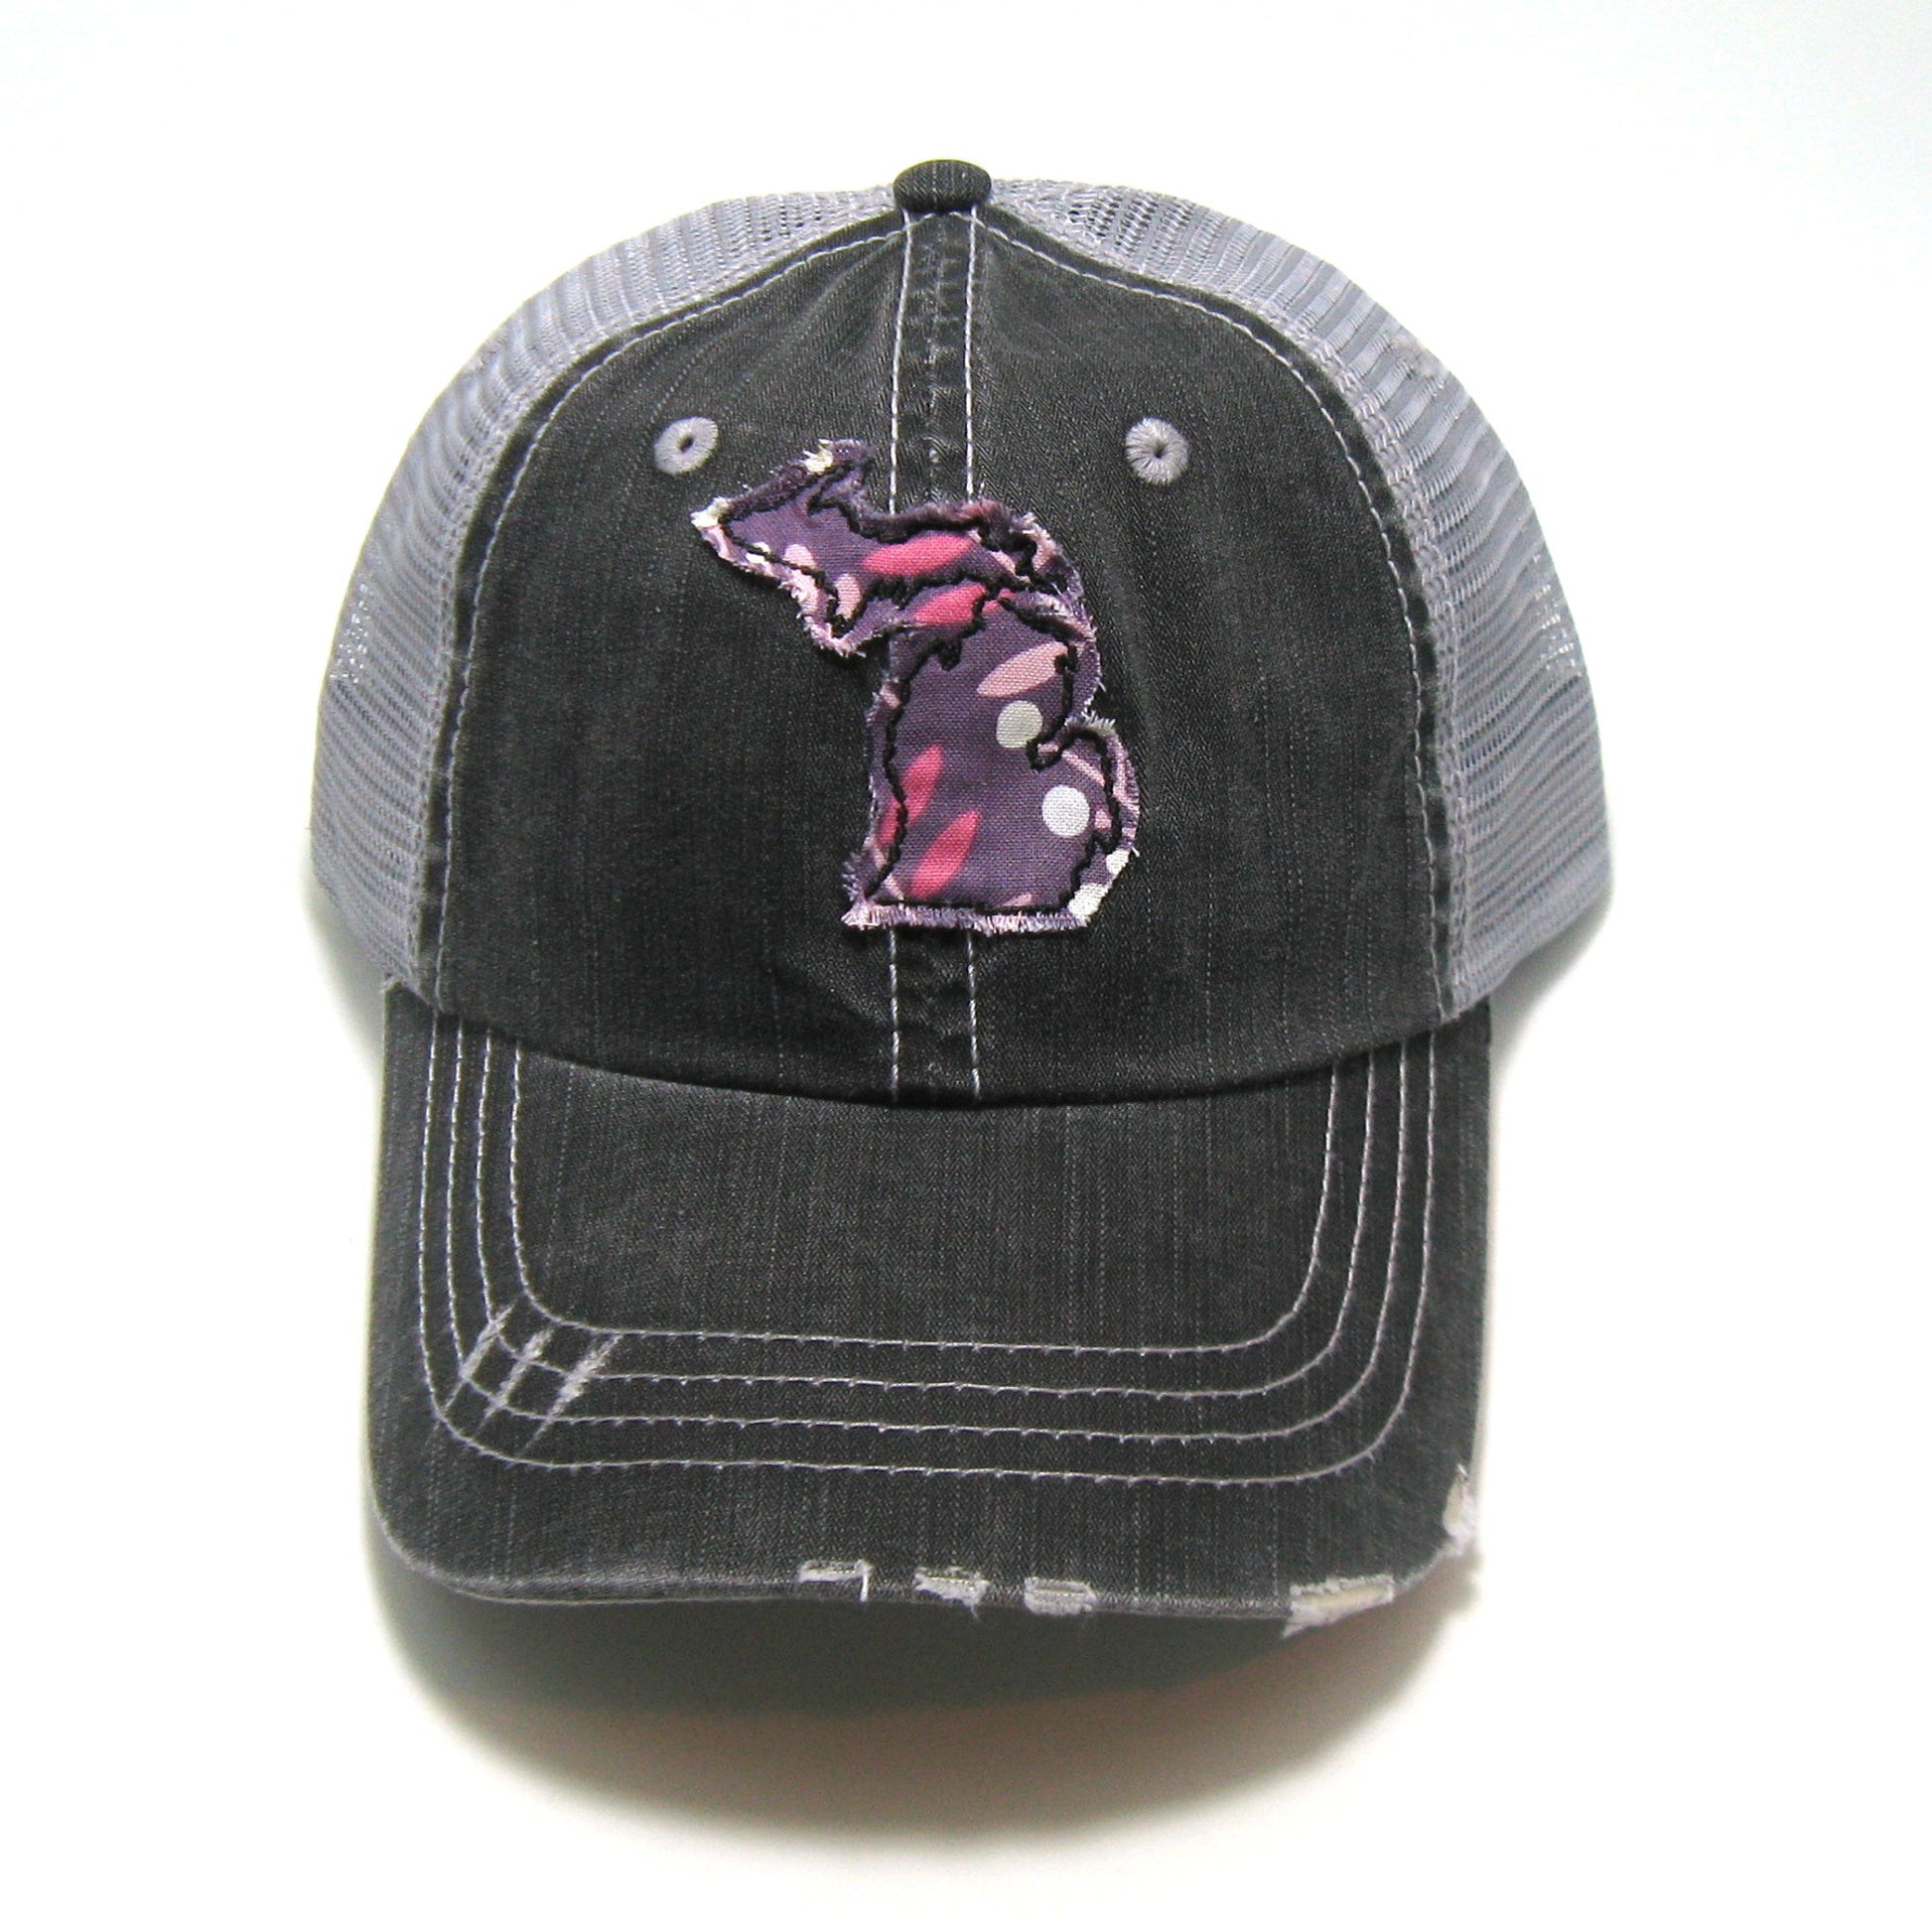 gray distressed trucker hat with gray floral fabric state of Michigan